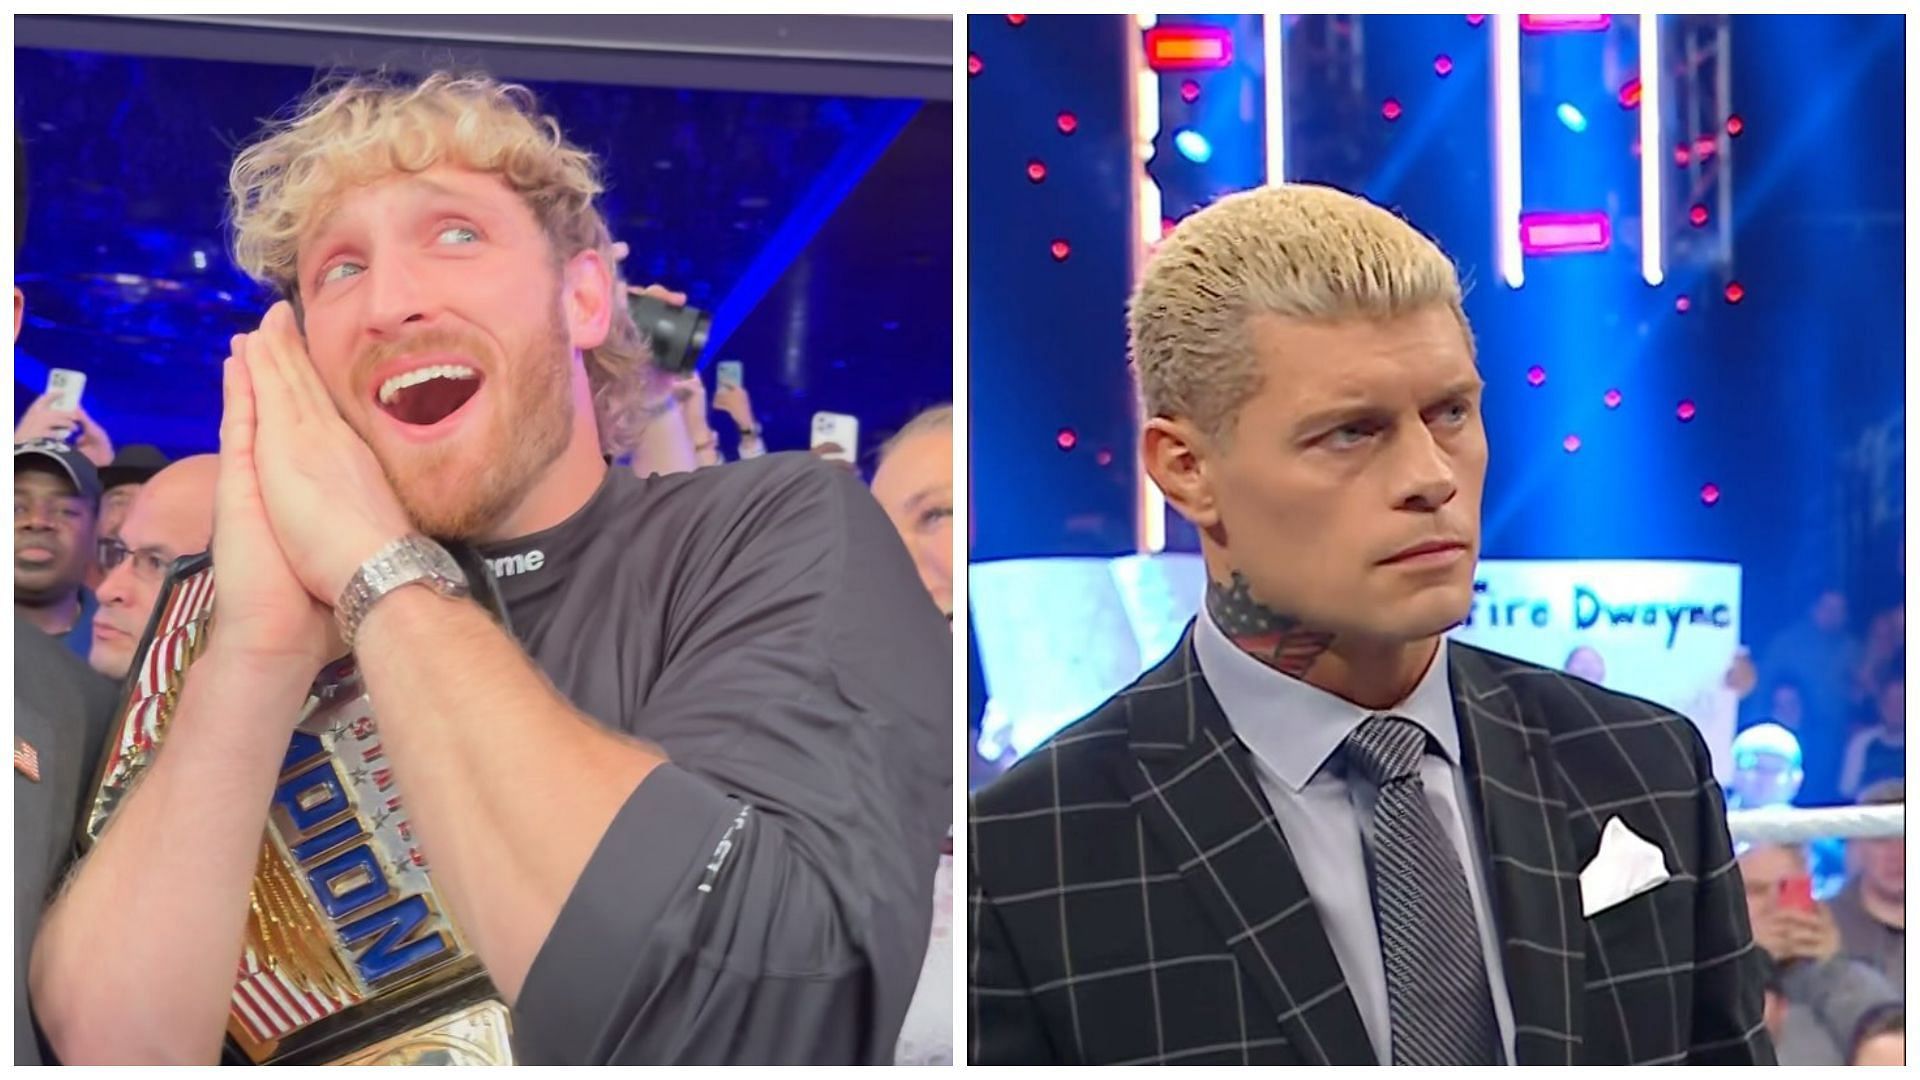 Logan Paul (left) and Cody Rhodes (right).